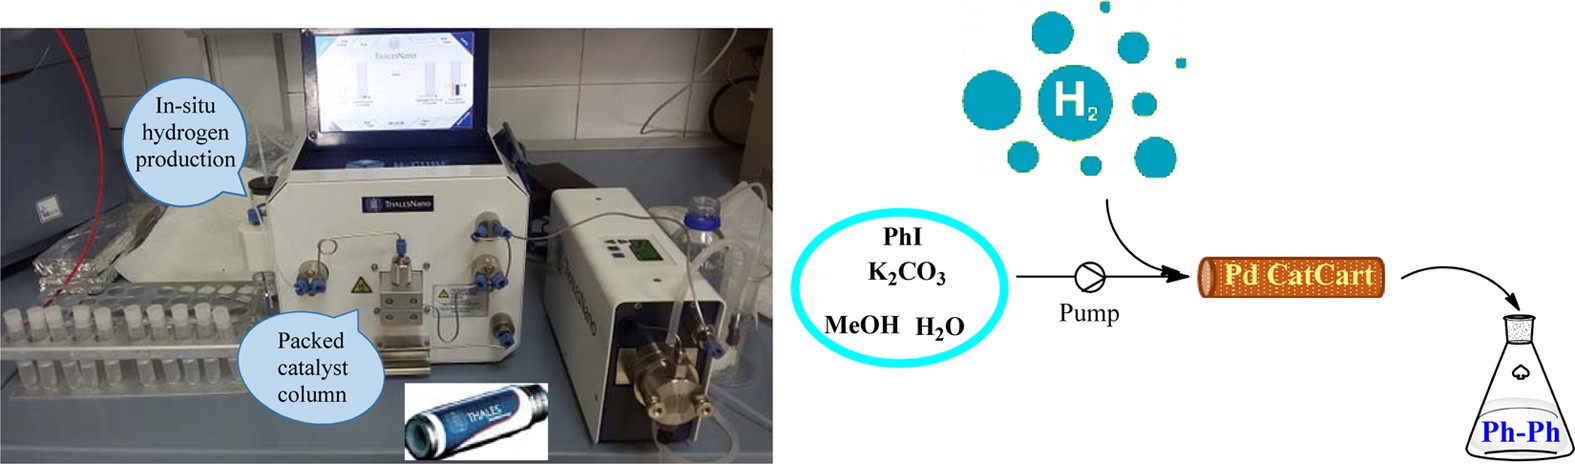 Continuous flow room temperature reductive aqueous homo-coupling of aryl  halides using supported Pd catalysts | Scientific Reports